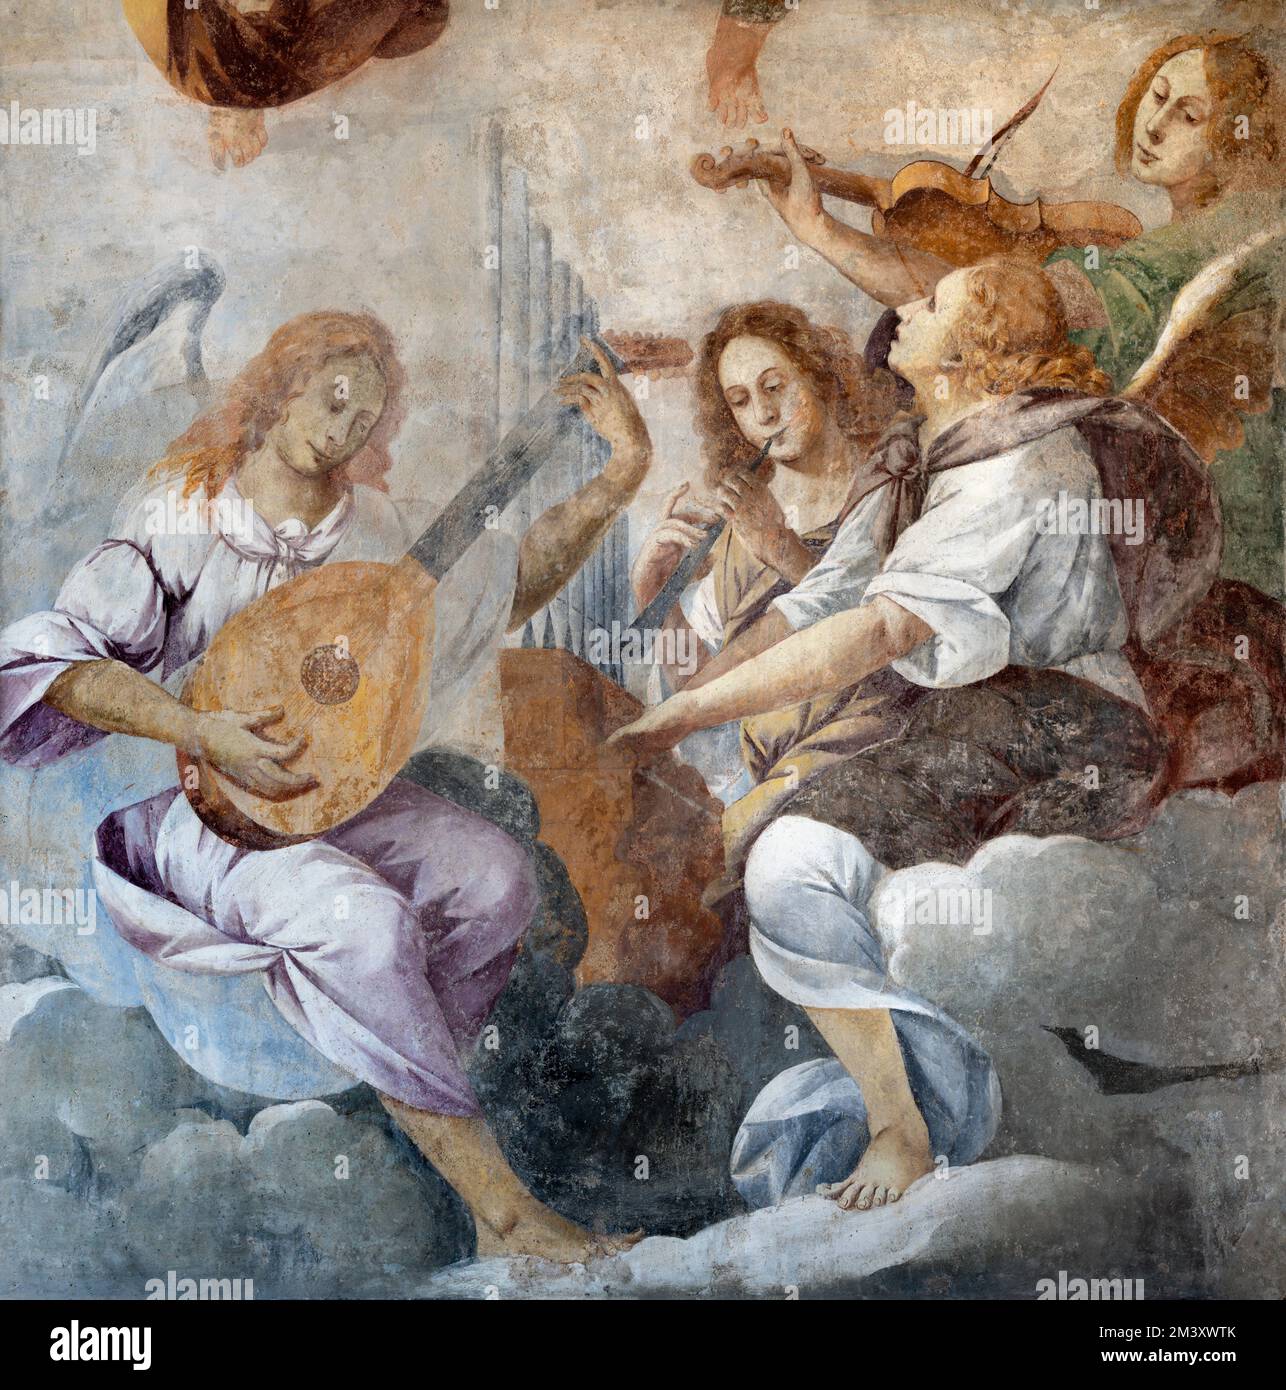 DOMODOSSOLA, ITALY - JULY 19, 2022: The baroque fresco of angels with the music instruments in the church Chiesa dei Santi Gervasio e Protasio Stock Photo